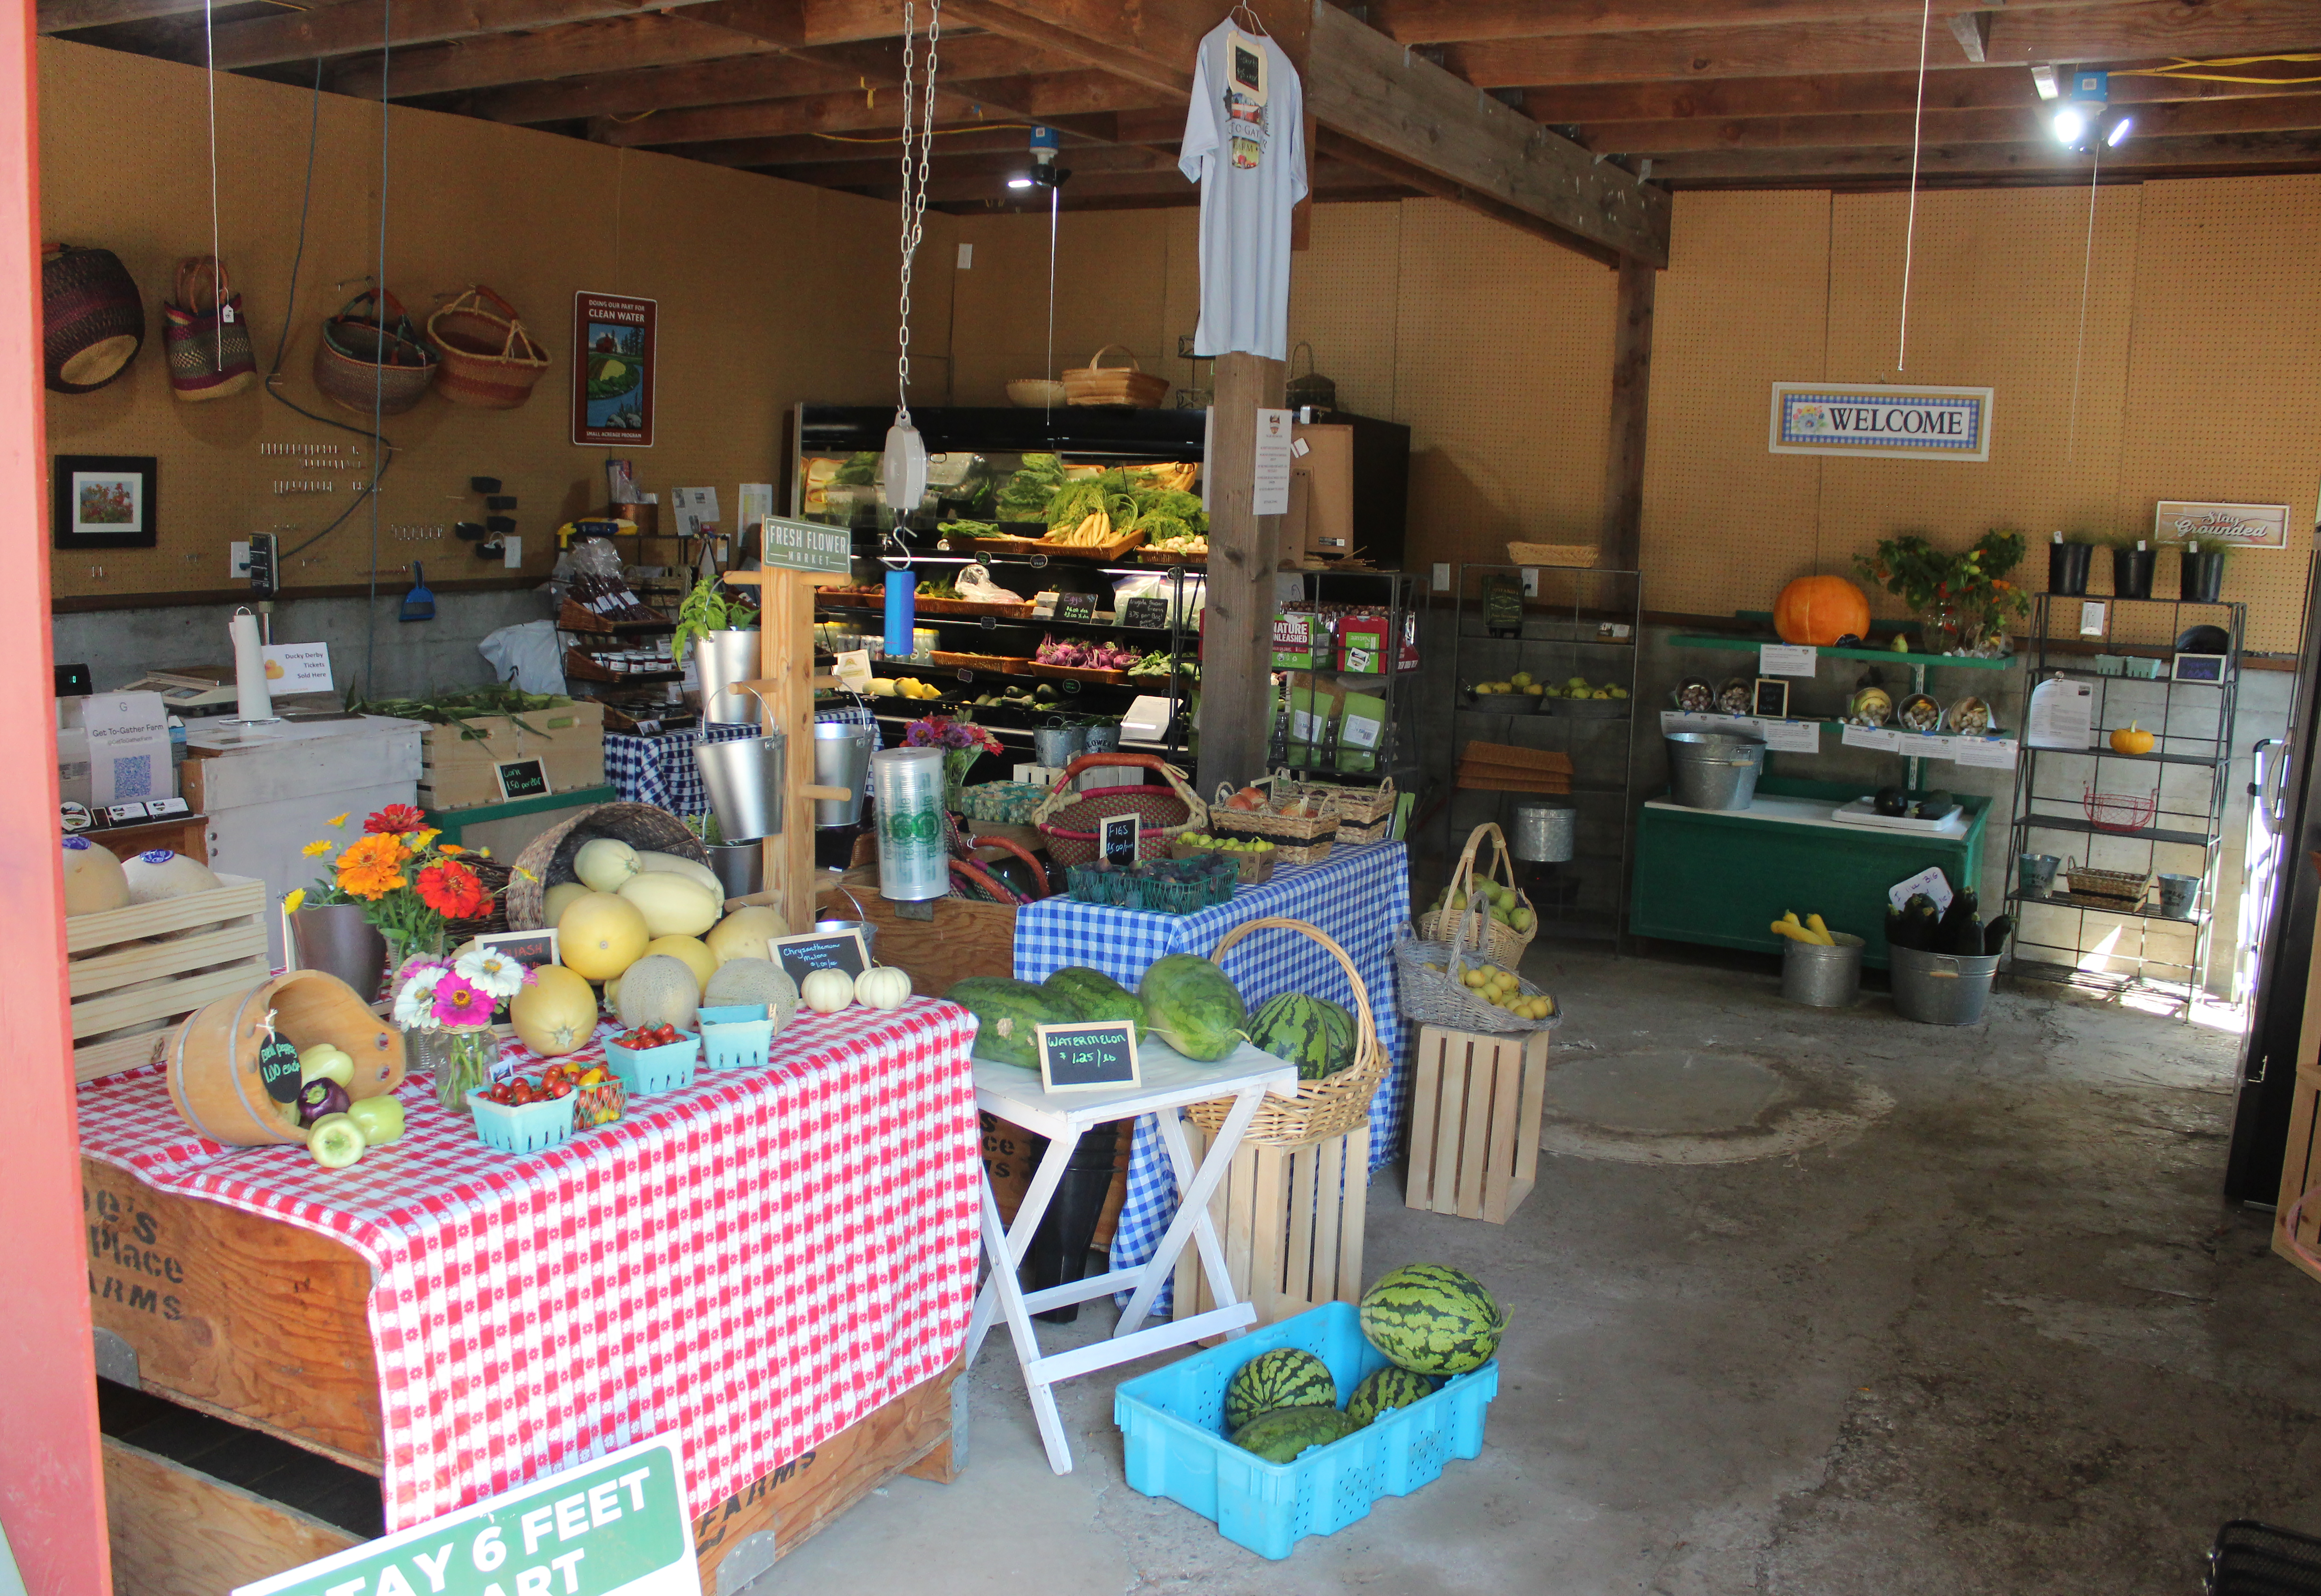 Doug Flanagan/Post-Record
The retail stand at Get To-Gather Farm in Washougal opened earlier this year, selling a wide variety of locally grown produce.